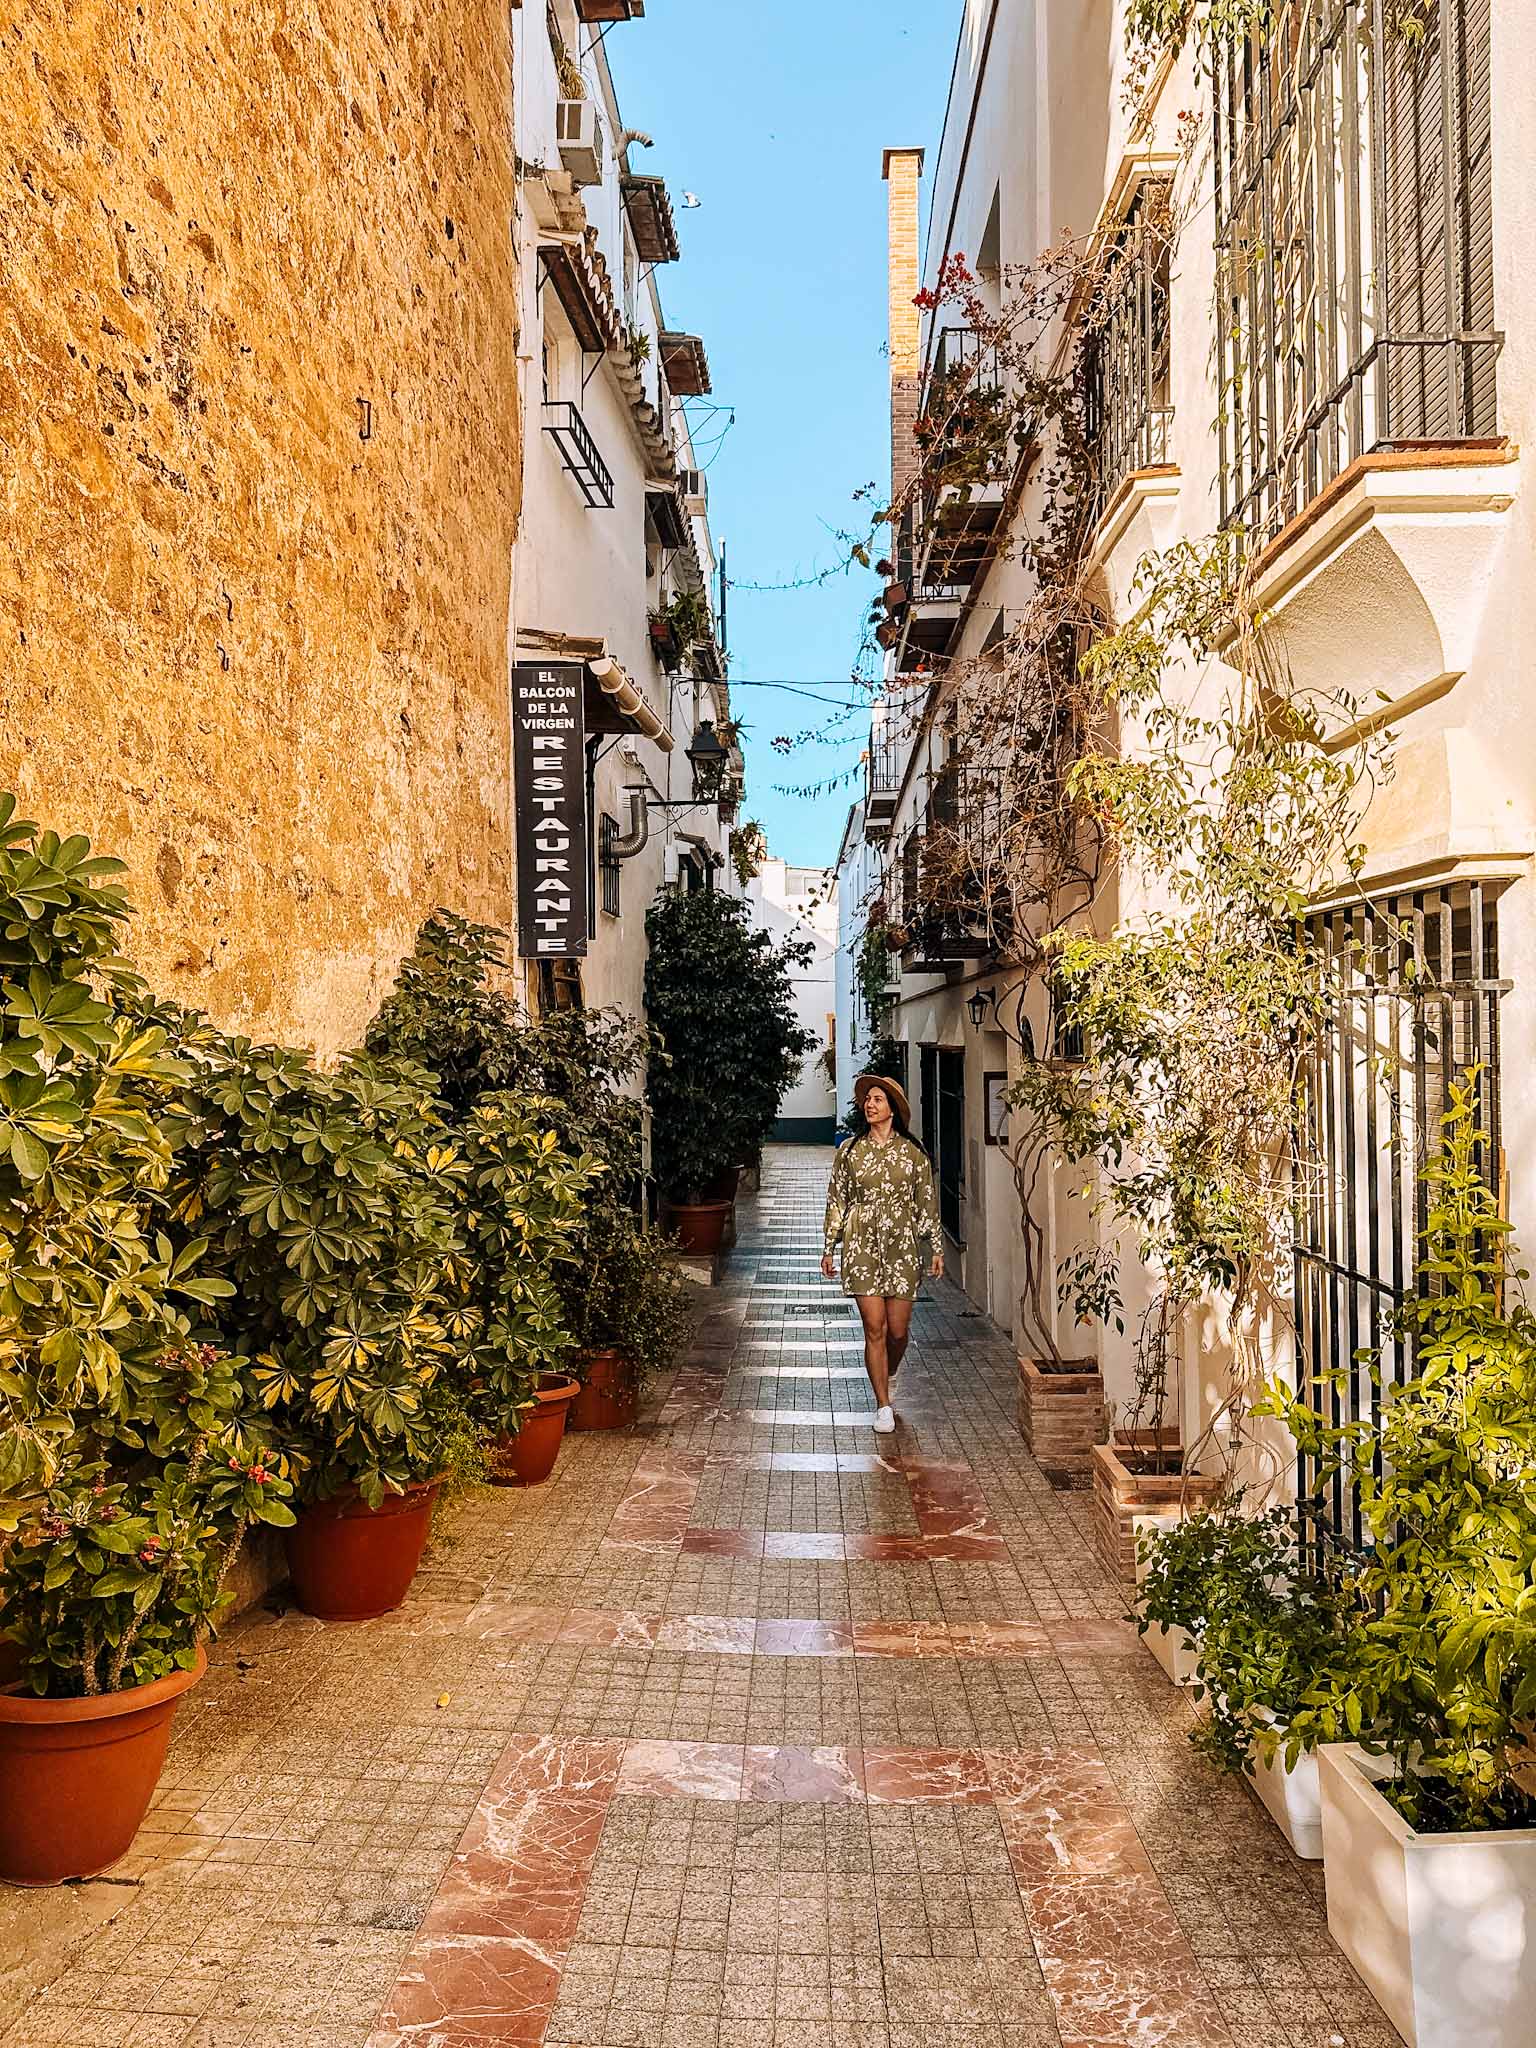 Most beautiful streets in Marbella, Spain - Calle Solano